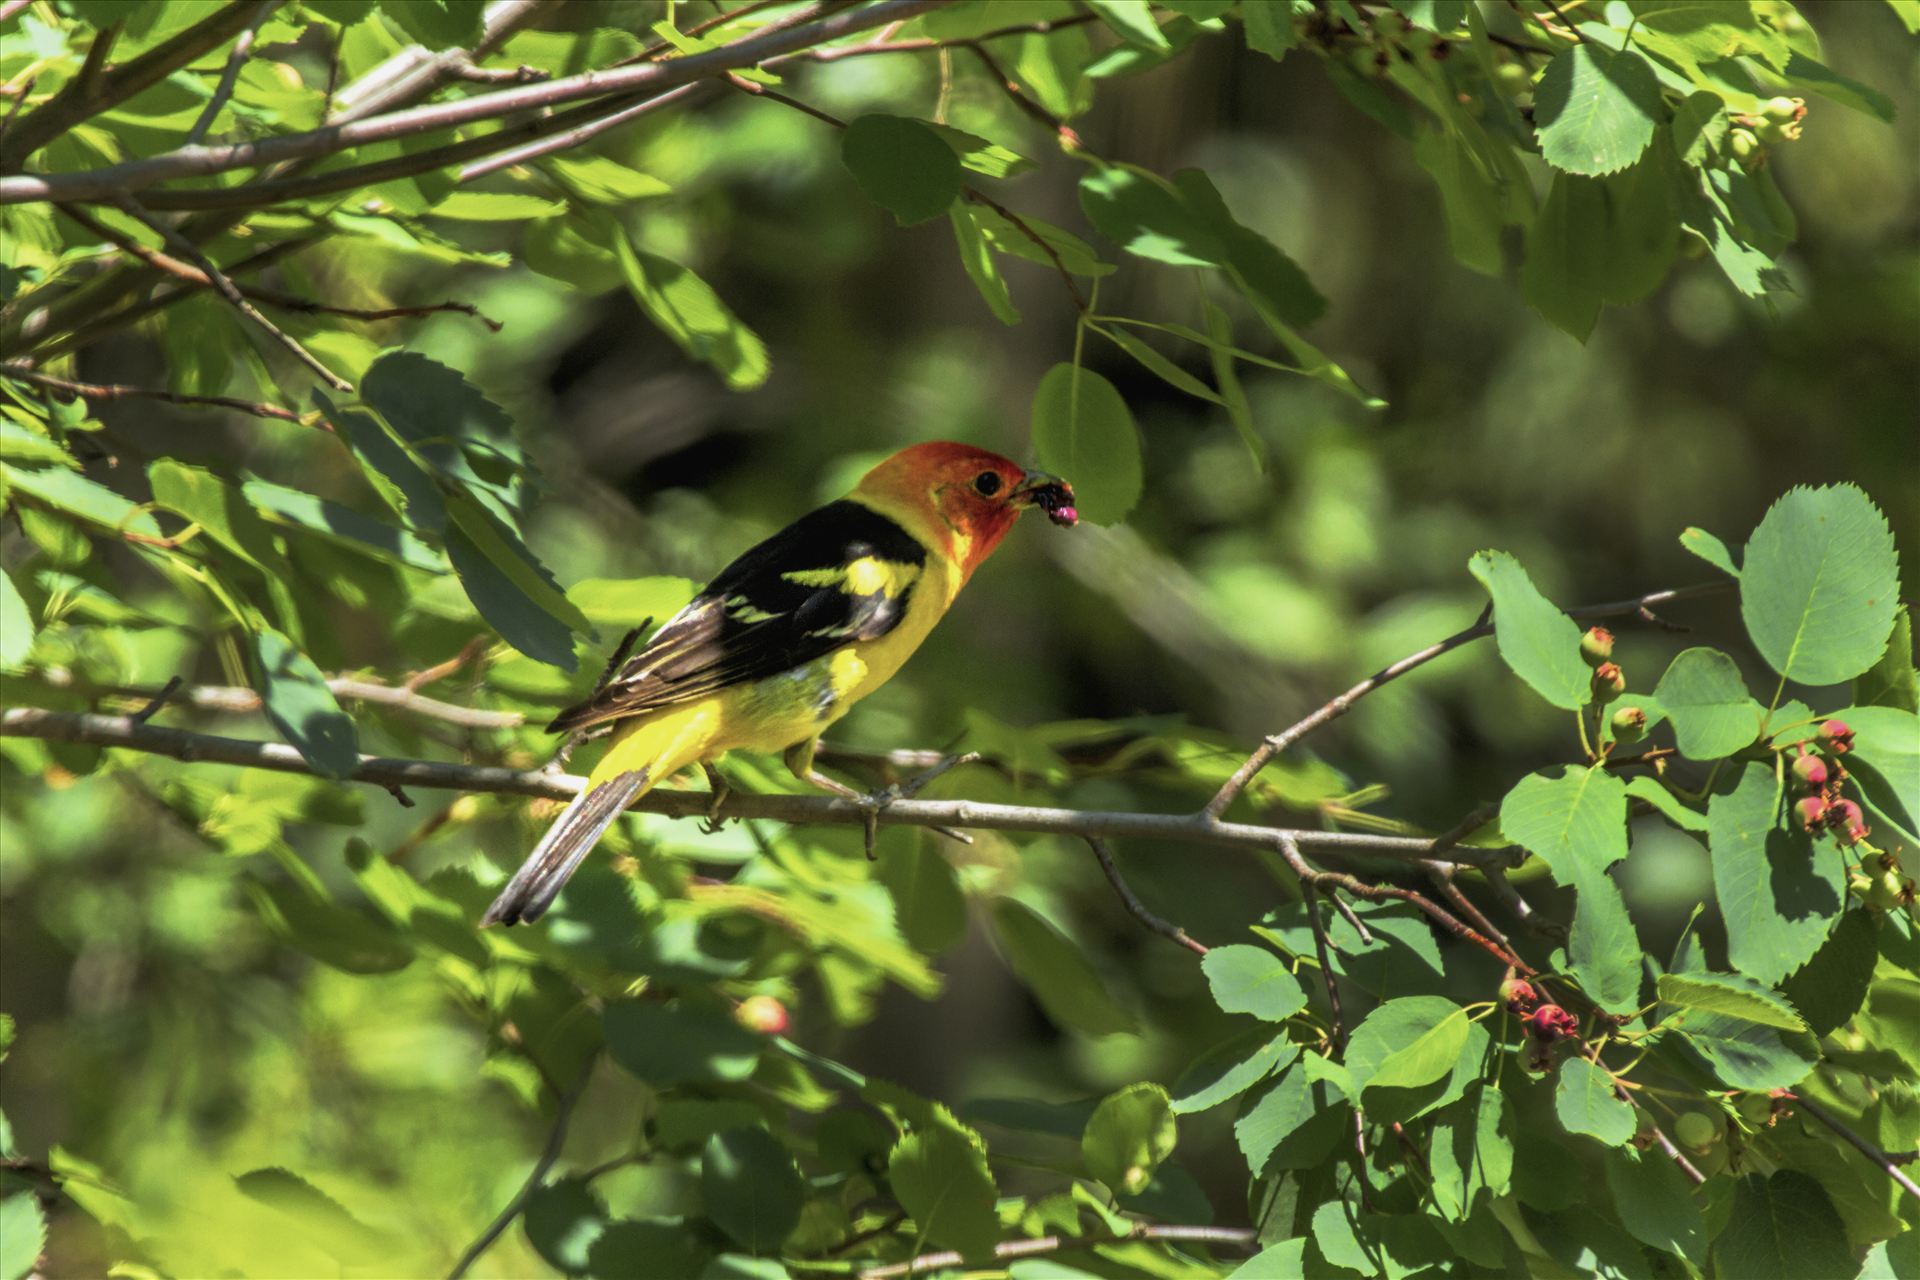 Western Tanager with Dinner A Western Tanager with its beak full of berries. by Bear Conceptions Photography